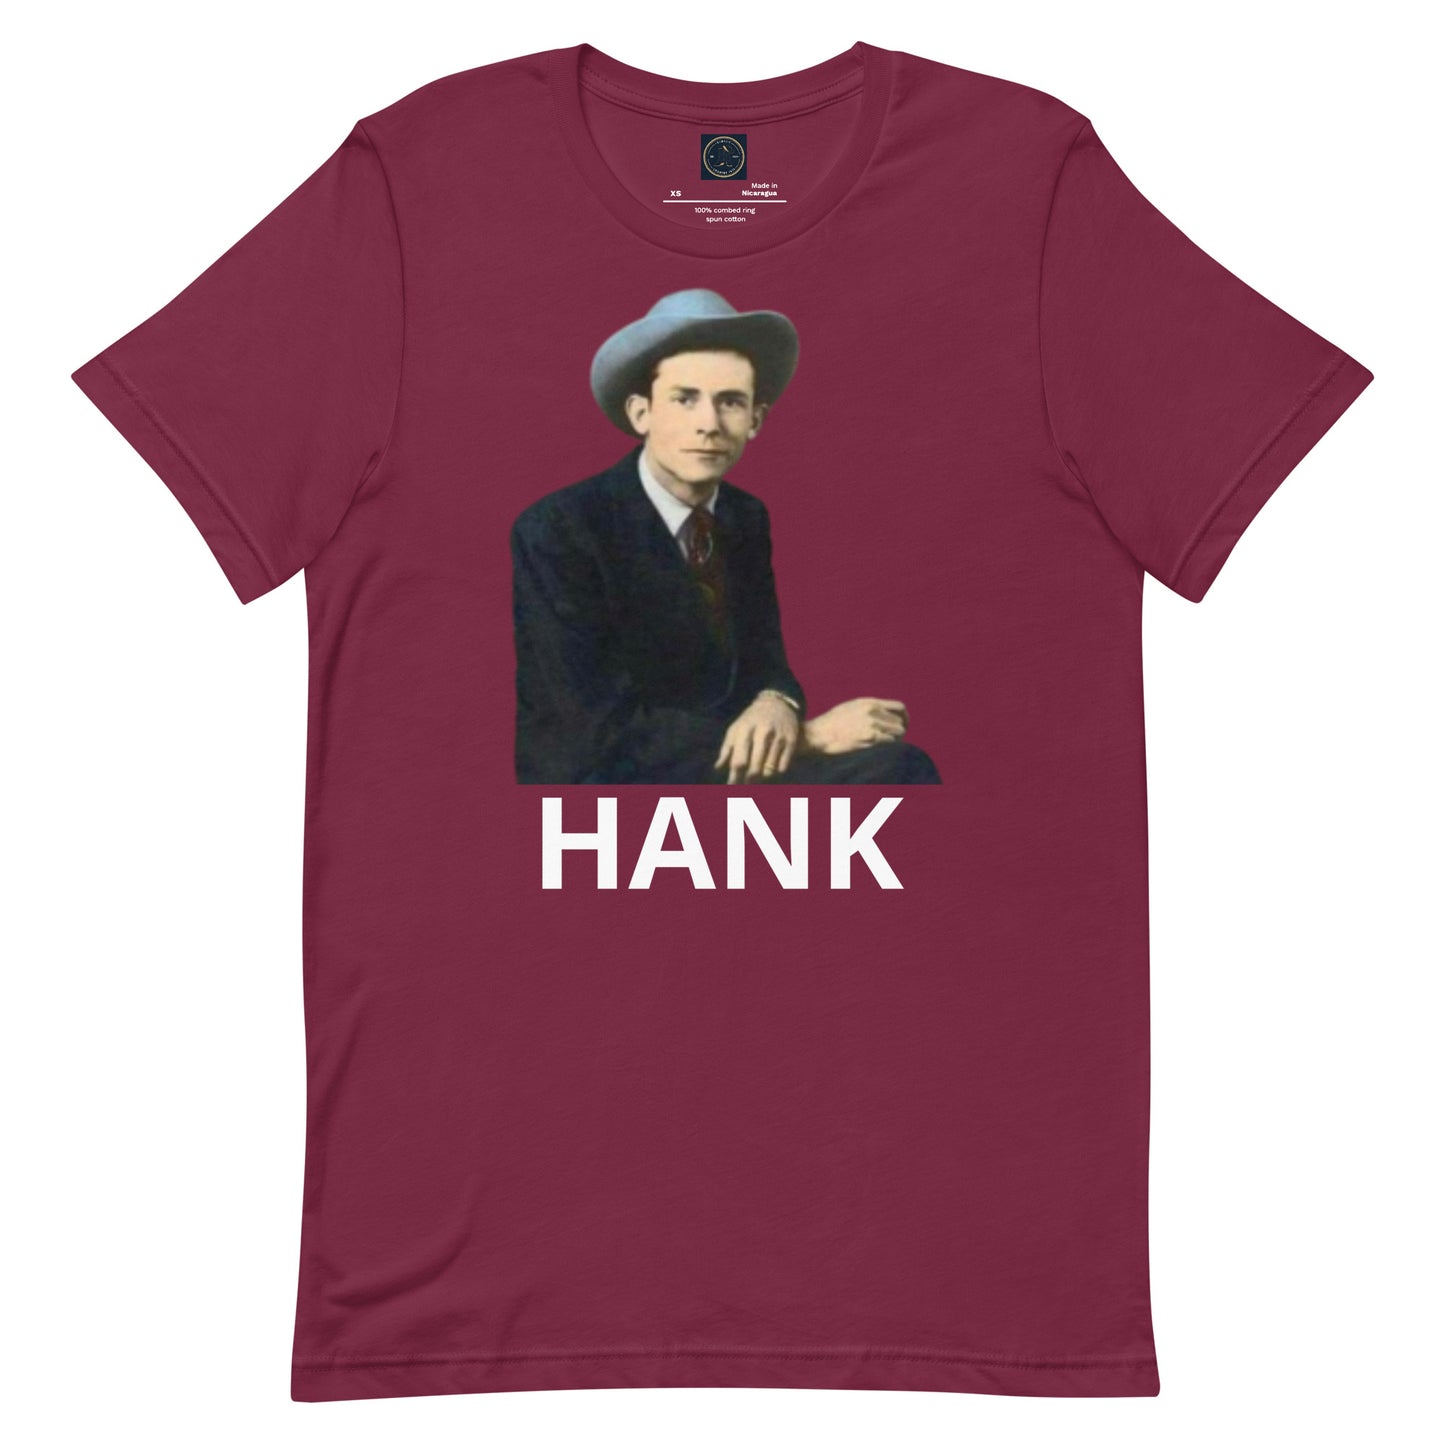 Hank - Get Your Twang On with Classic Country Tees - The Ultimate Unisex T-Shirt for True Country Souls! - Classic Country Tees